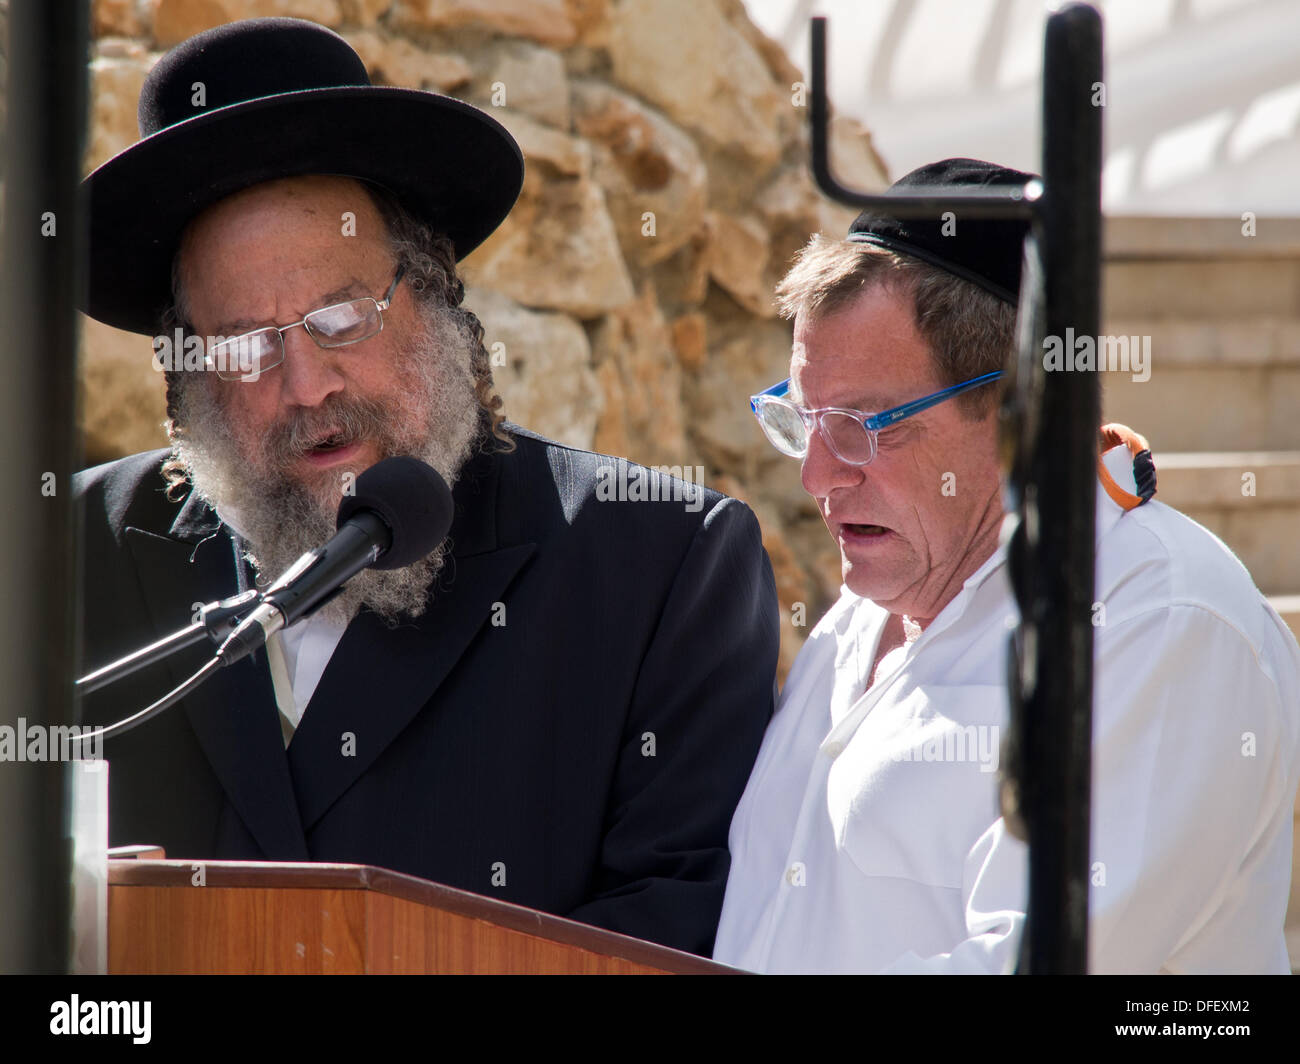 Jerusalem, Israel. 03rd Oct, 2013. Sons, PALMACH ZEEVI (R) and BENYAMIN ZEEVI (L) recite the Kadish prayer at a memorial ceremony for their father, Rehavam 'Gandhi' Zeevi. Jerusalem, Israel. 3-Oct-2013.  Ceremony at Mt. Herzl Military Cemetery honors Rehavam 'Gandhi' Zeevi, former military general, MK and Minister, assassinated October 17th, 2001 at the Jerusalem Hyatt Hotel by Hamdi Quran of the Popular Front for the Liberation of Palestine. Credit:  Nir Alon/Alamy Live News Stock Photo